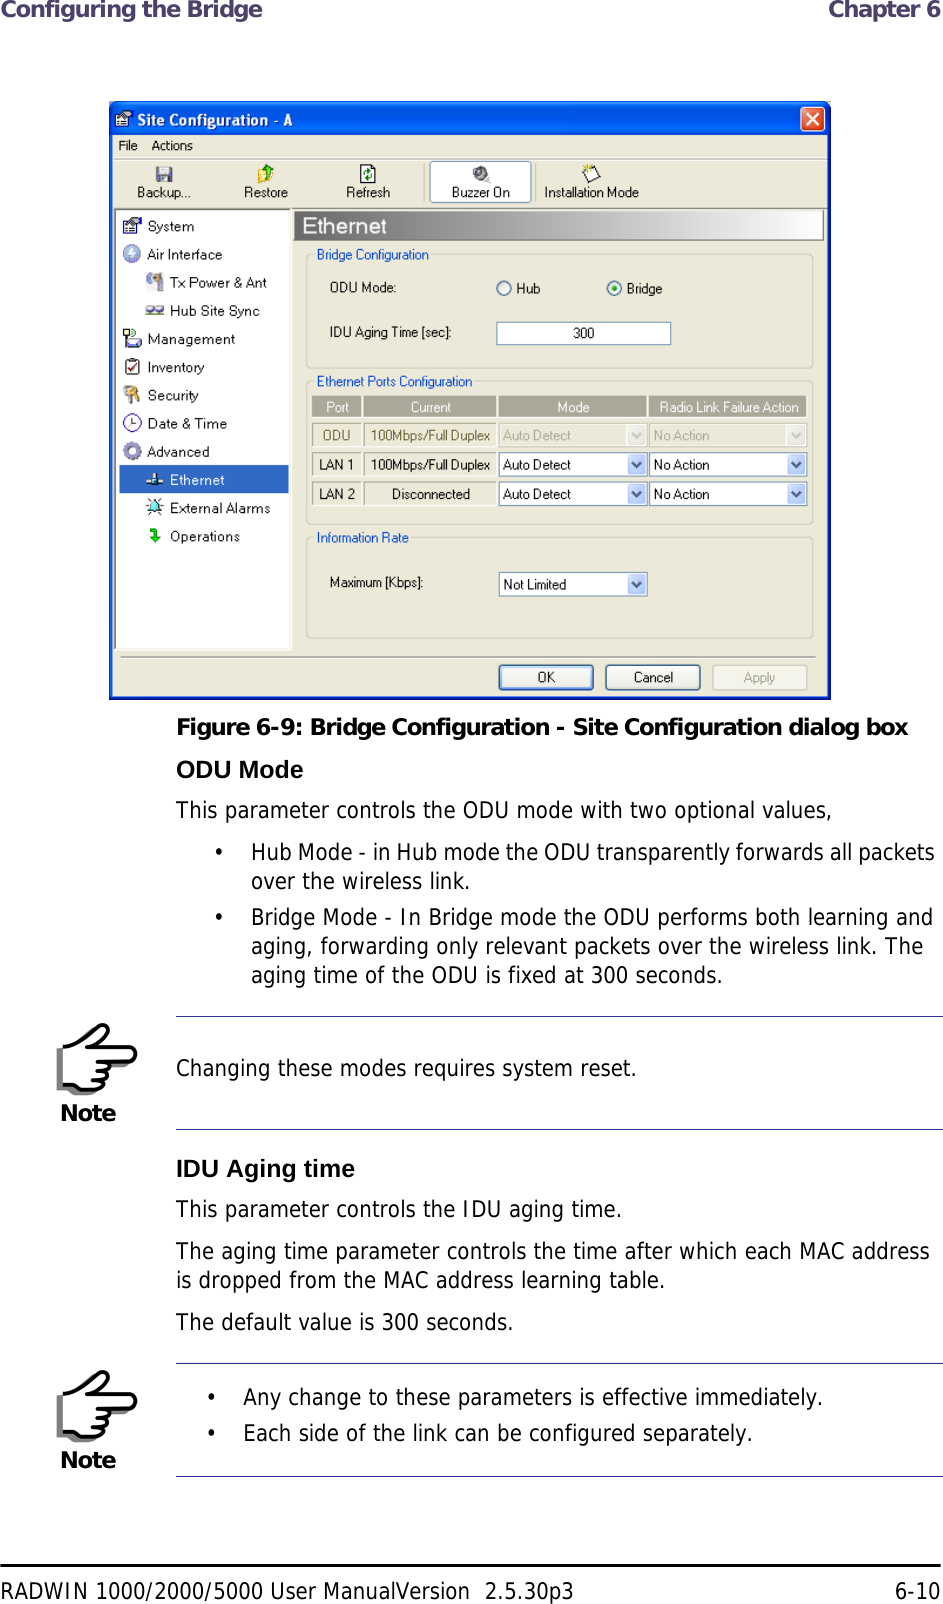 Configuring the Bridge  Chapter 6RADWIN 1000/2000/5000 User ManualVersion  2.5.30p3 6-10Figure 6-9: Bridge Configuration - Site Configuration dialog boxODU ModeThis parameter controls the ODU mode with two optional values, • Hub Mode - in Hub mode the ODU transparently forwards all packets over the wireless link.• Bridge Mode - In Bridge mode the ODU performs both learning and aging, forwarding only relevant packets over the wireless link. The aging time of the ODU is fixed at 300 seconds.IDU Aging timeThis parameter controls the IDU aging time.The aging time parameter controls the time after which each MAC address is dropped from the MAC address learning table.The default value is 300 seconds.NoteChanging these modes requires system reset.Note• Any change to these parameters is effective immediately.• Each side of the link can be configured separately.